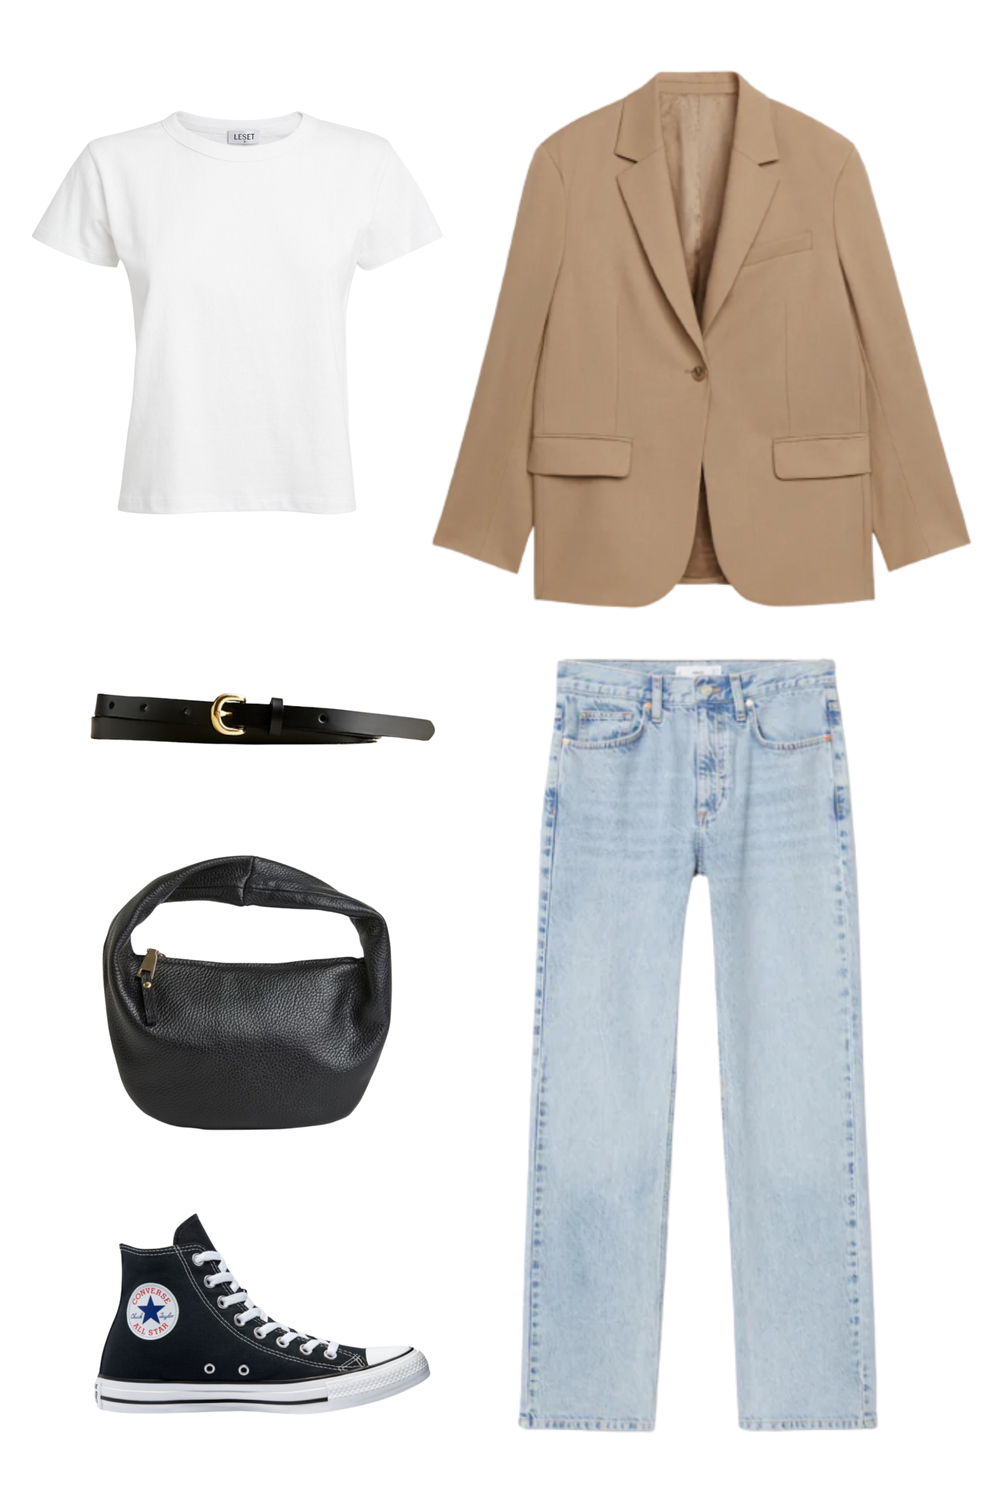 5 Stylish Ways to Wear a White Tee This Fall